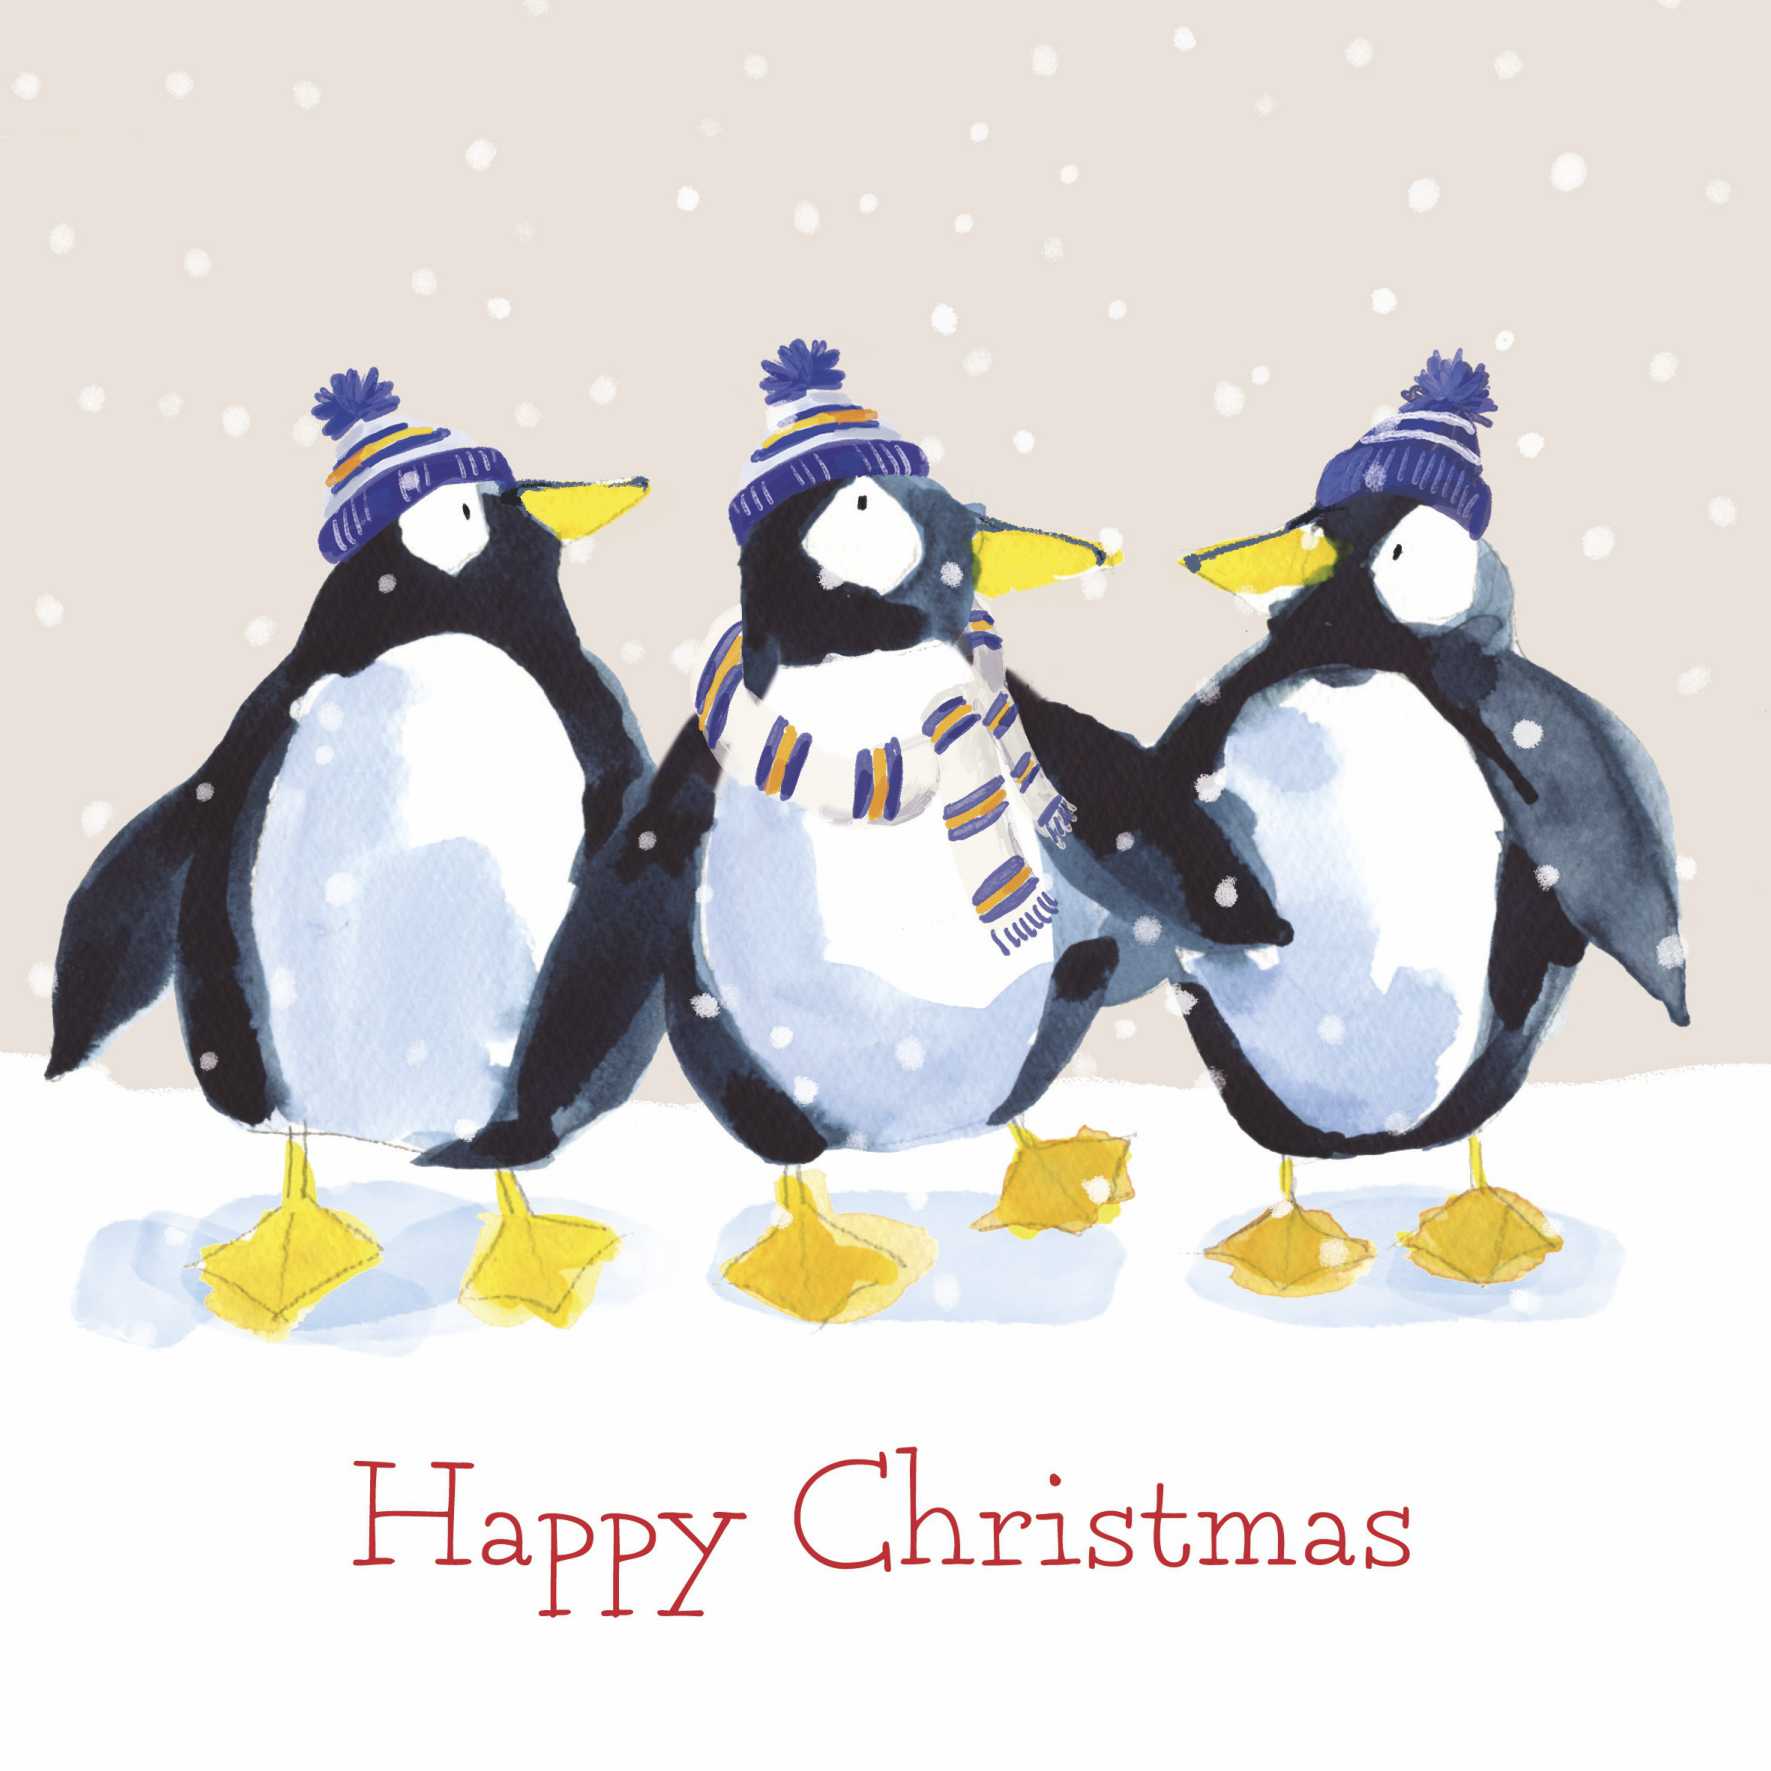 Illustration of three penguins wearing blue, yellow and white striped hats. The middle penguin is wearing a striped scarf. Red text at the bottom reads Happy Christmas.